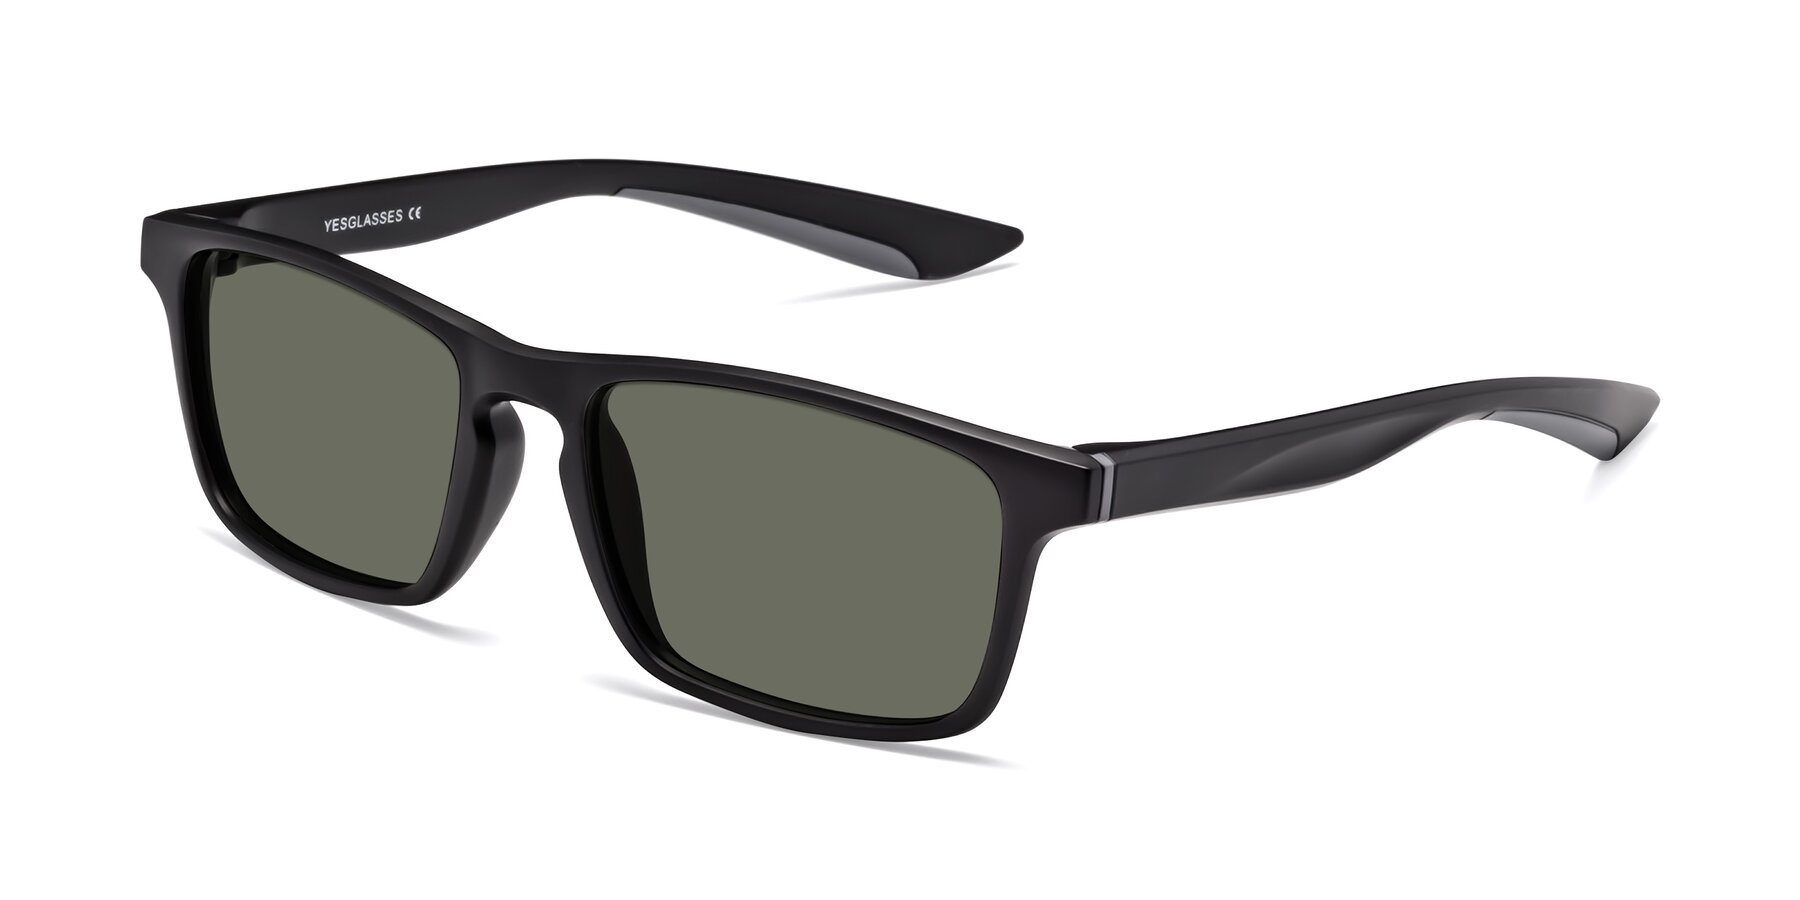 Angle of Passion in Matte Black-Gray with Gray Polarized Lenses